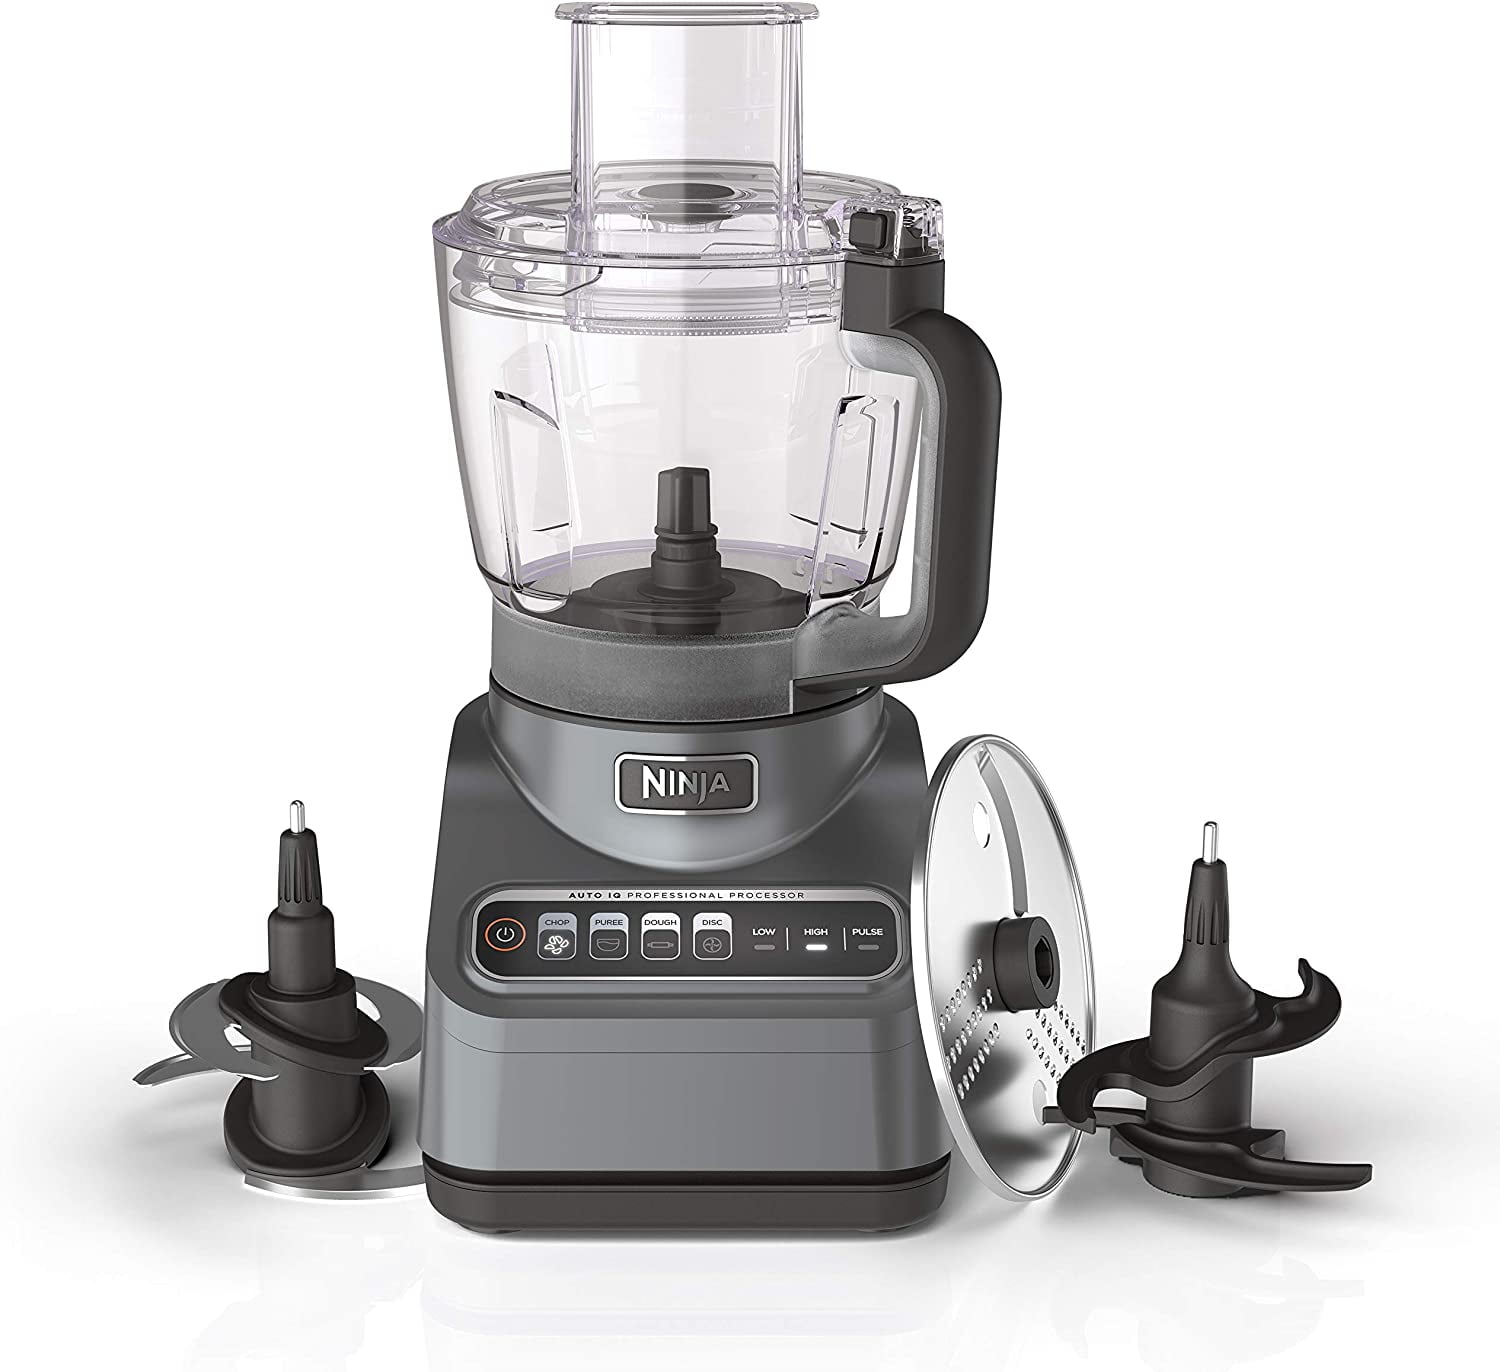  Food Processor, Anthter 600W Professional Food Processors &  Vegetable Chopper, with 7 Processor Cups, Reversible Disc, Chopping Blade &  Dough Blade for Chopping, Slicing, Purees & Dough: Home & Kitchen